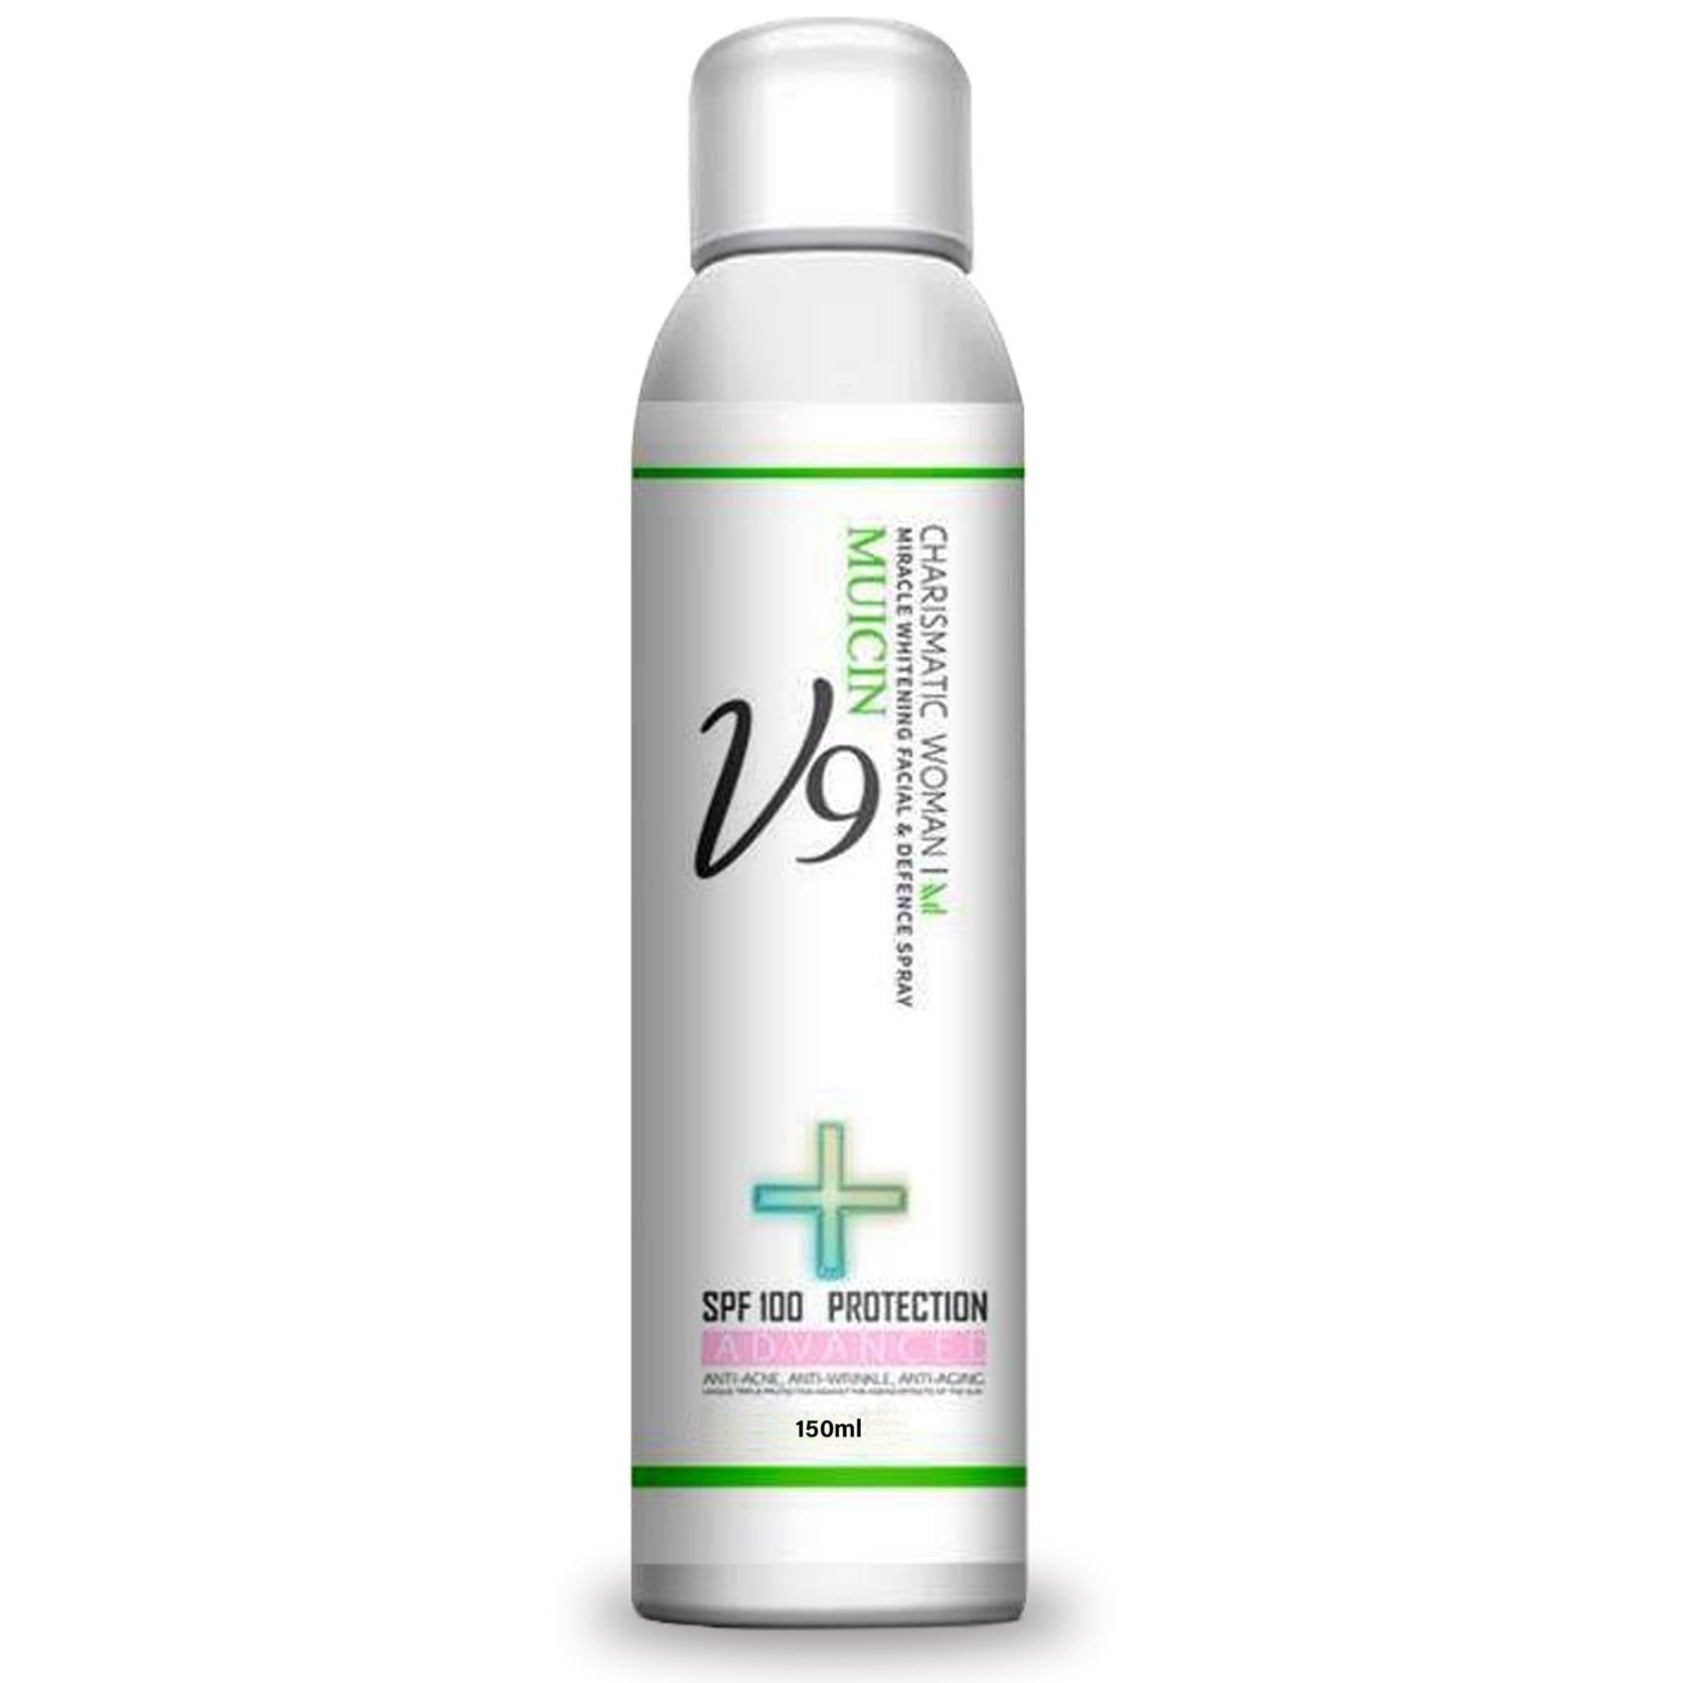 Buy  MUICIN - V9 Miracle Whitening Facial & Defence Spray Spf100 - 150ml - at Best Price Online in Pakistan